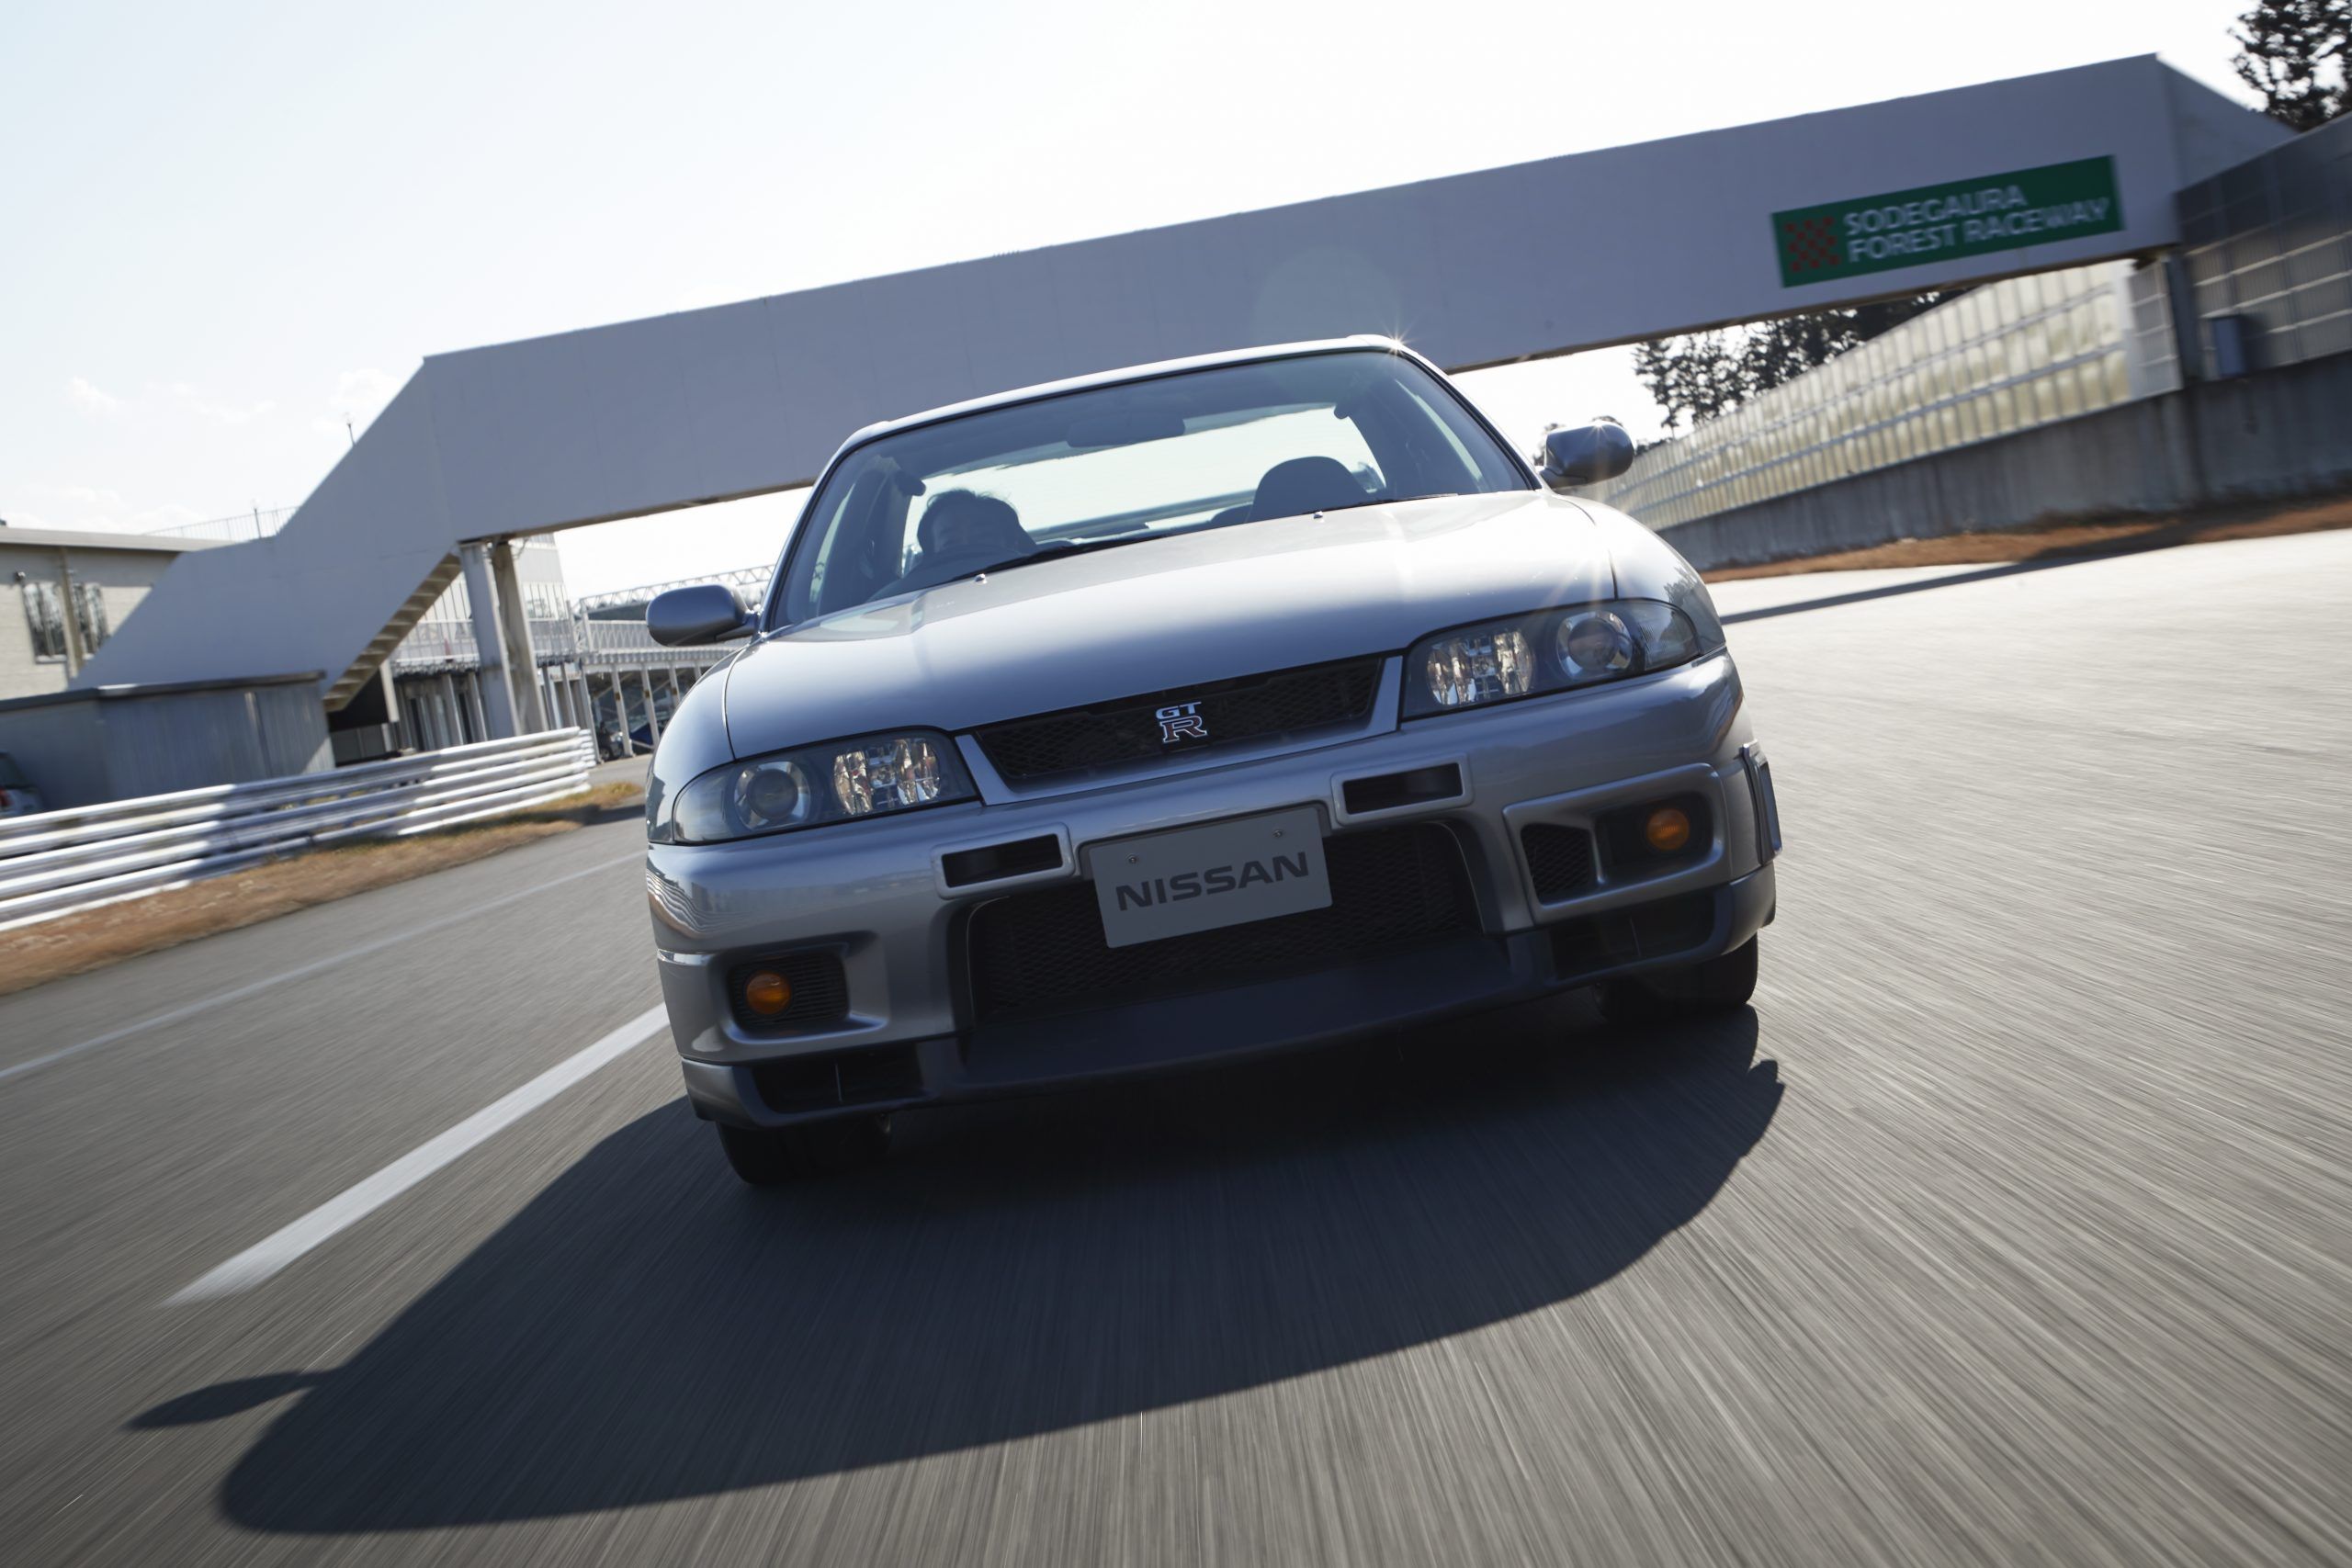 Nissan Skyline R33, silver, front profile